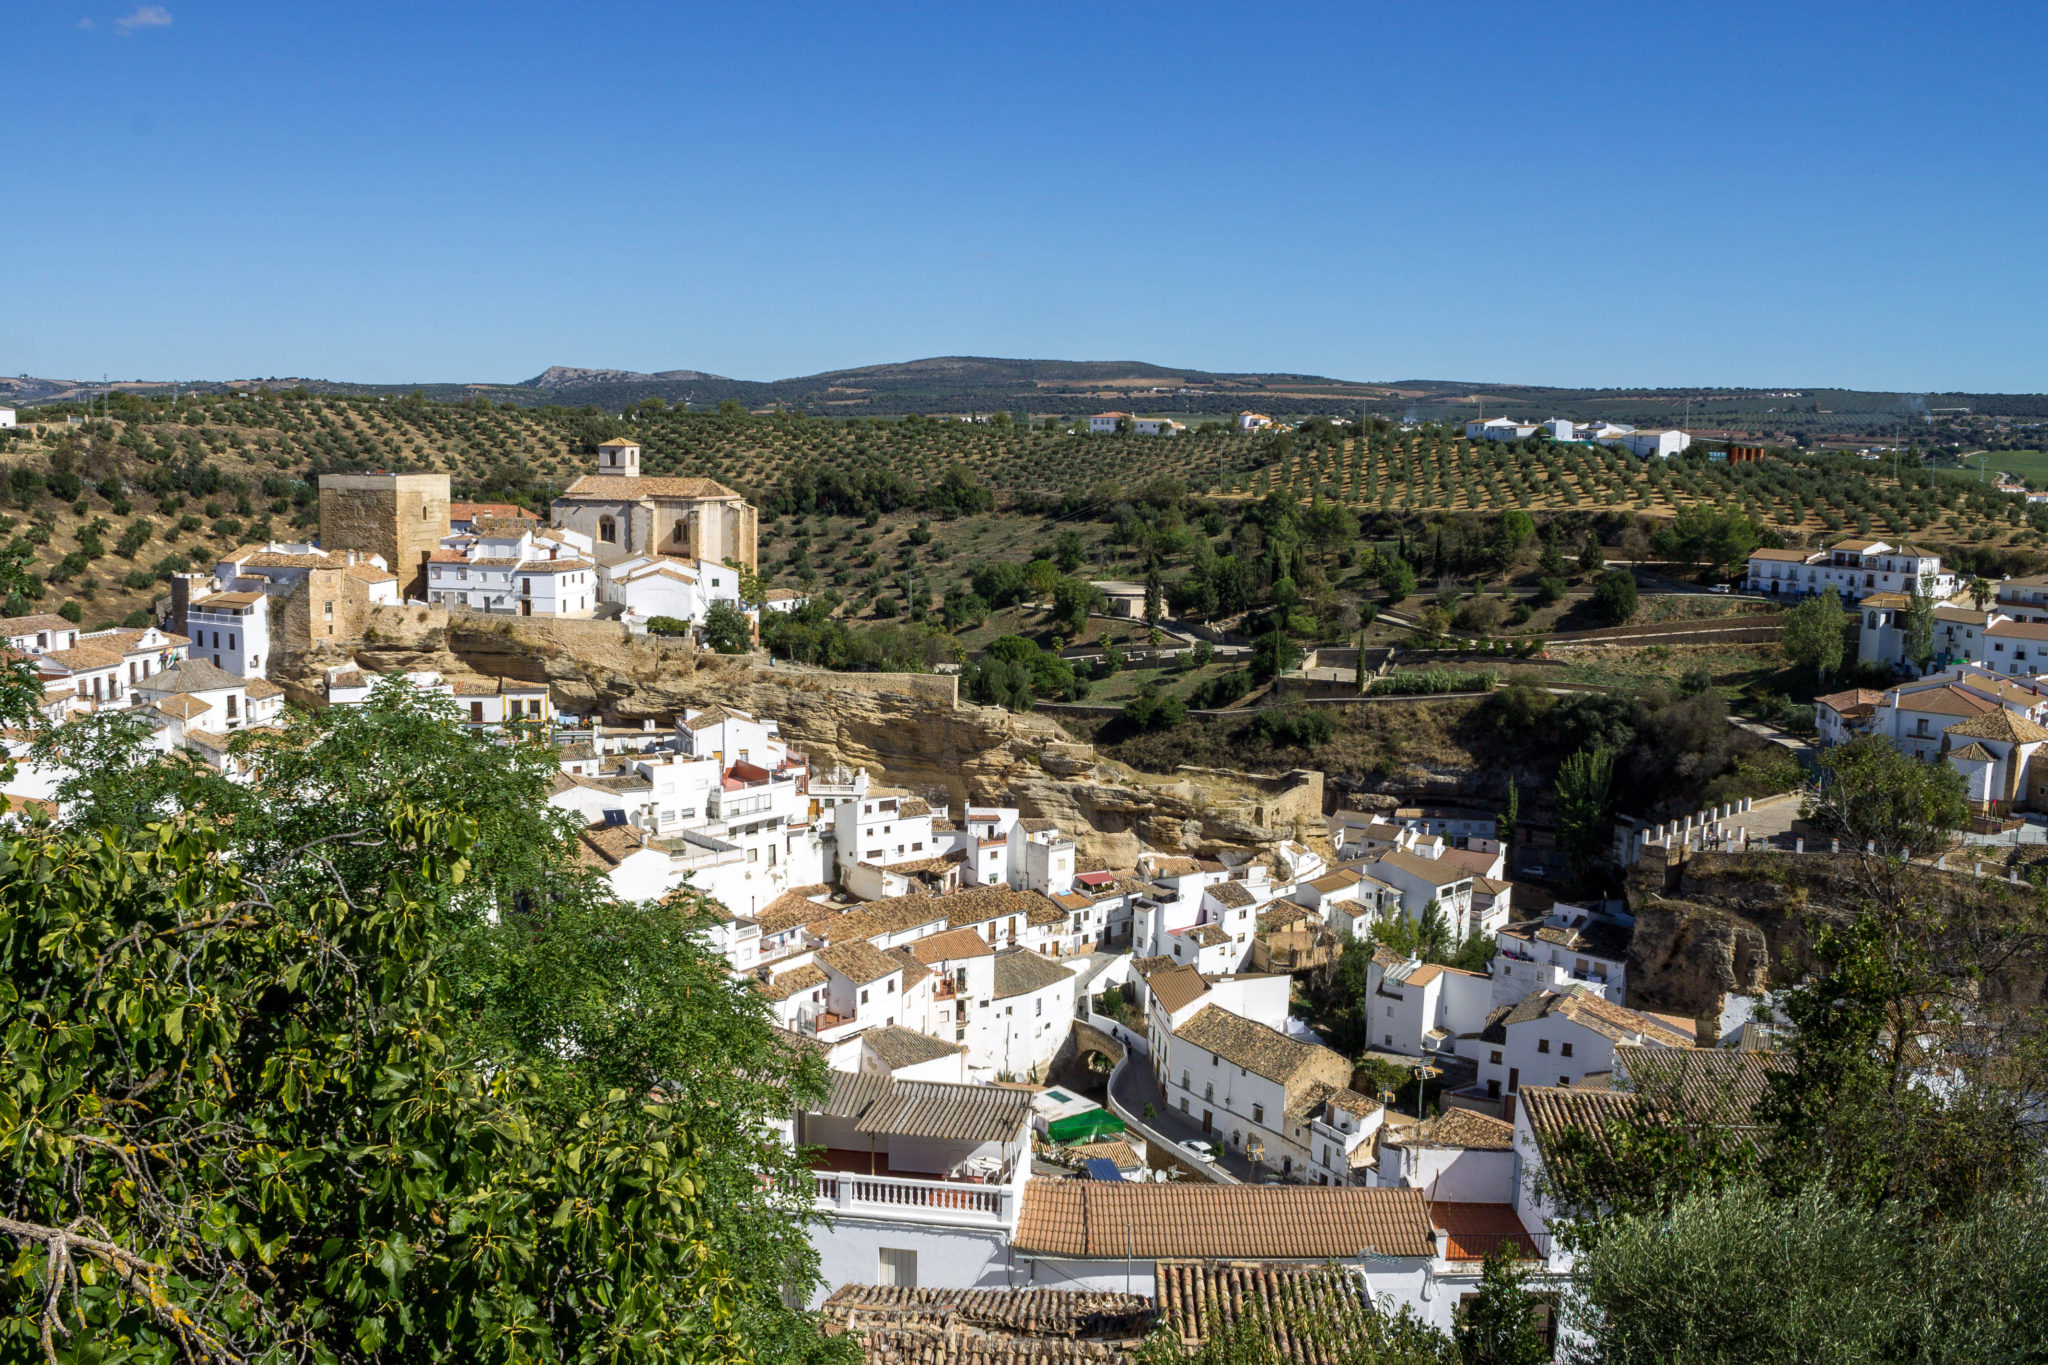 View of a pueblo blanco in Southern Spain. Andalusia has plenty of views like this and they are the perfect day trip between Malaga and Seville